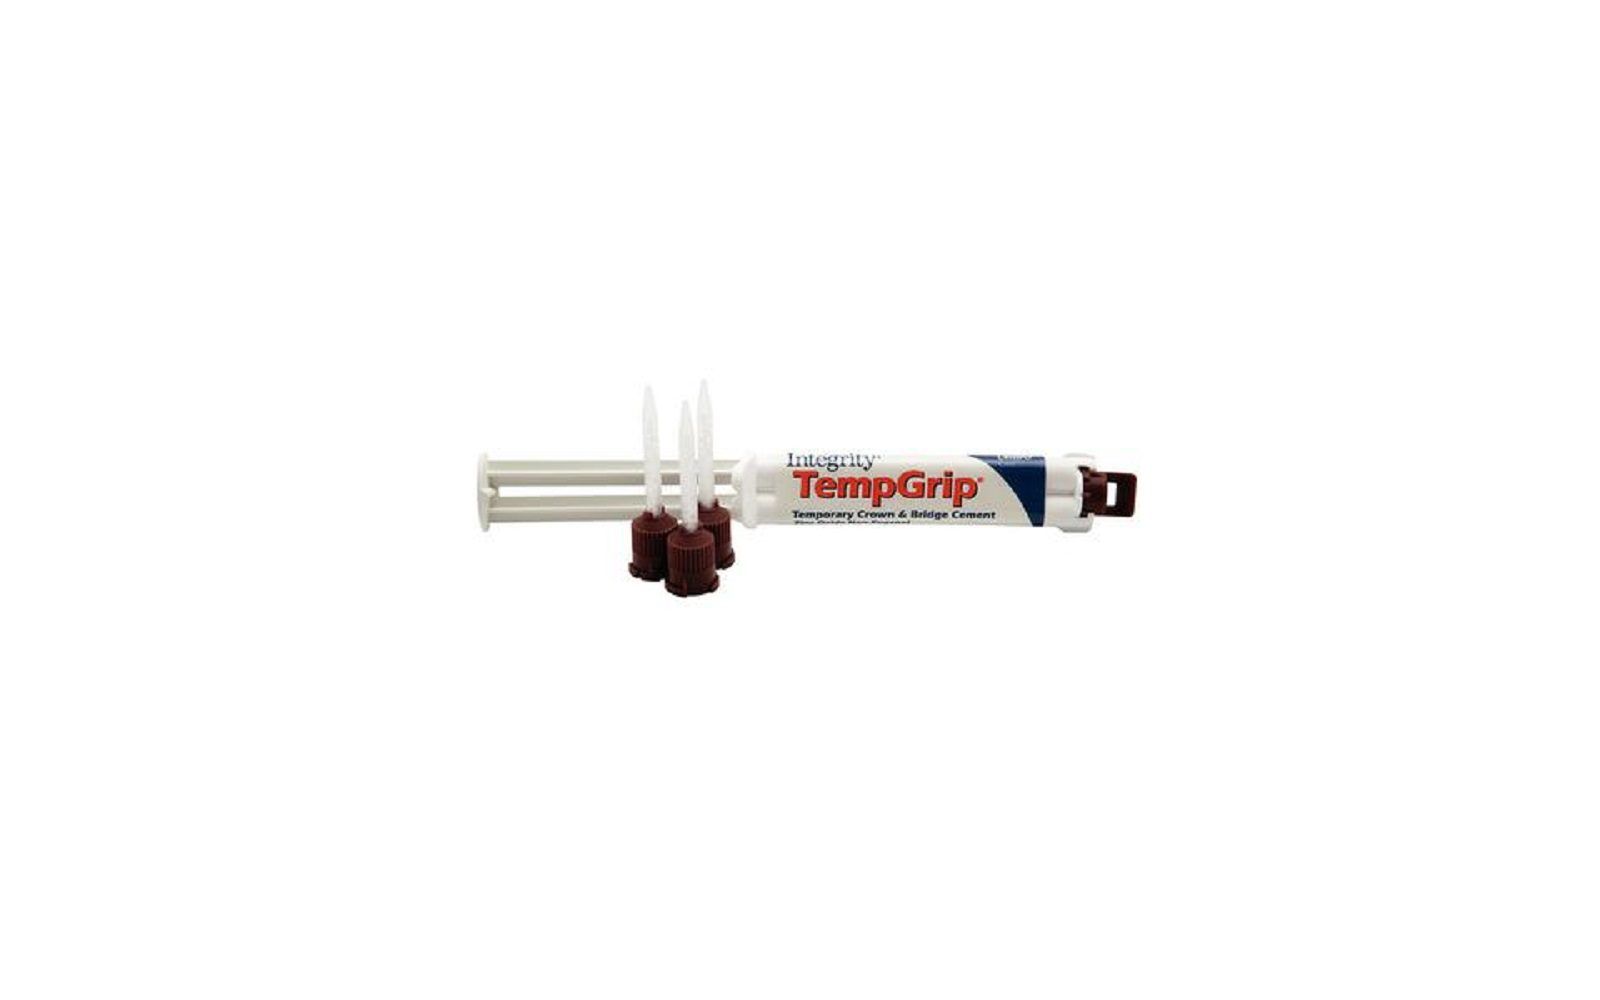 Integrity® tempgrip™ temporary crown and bridge cement, refill